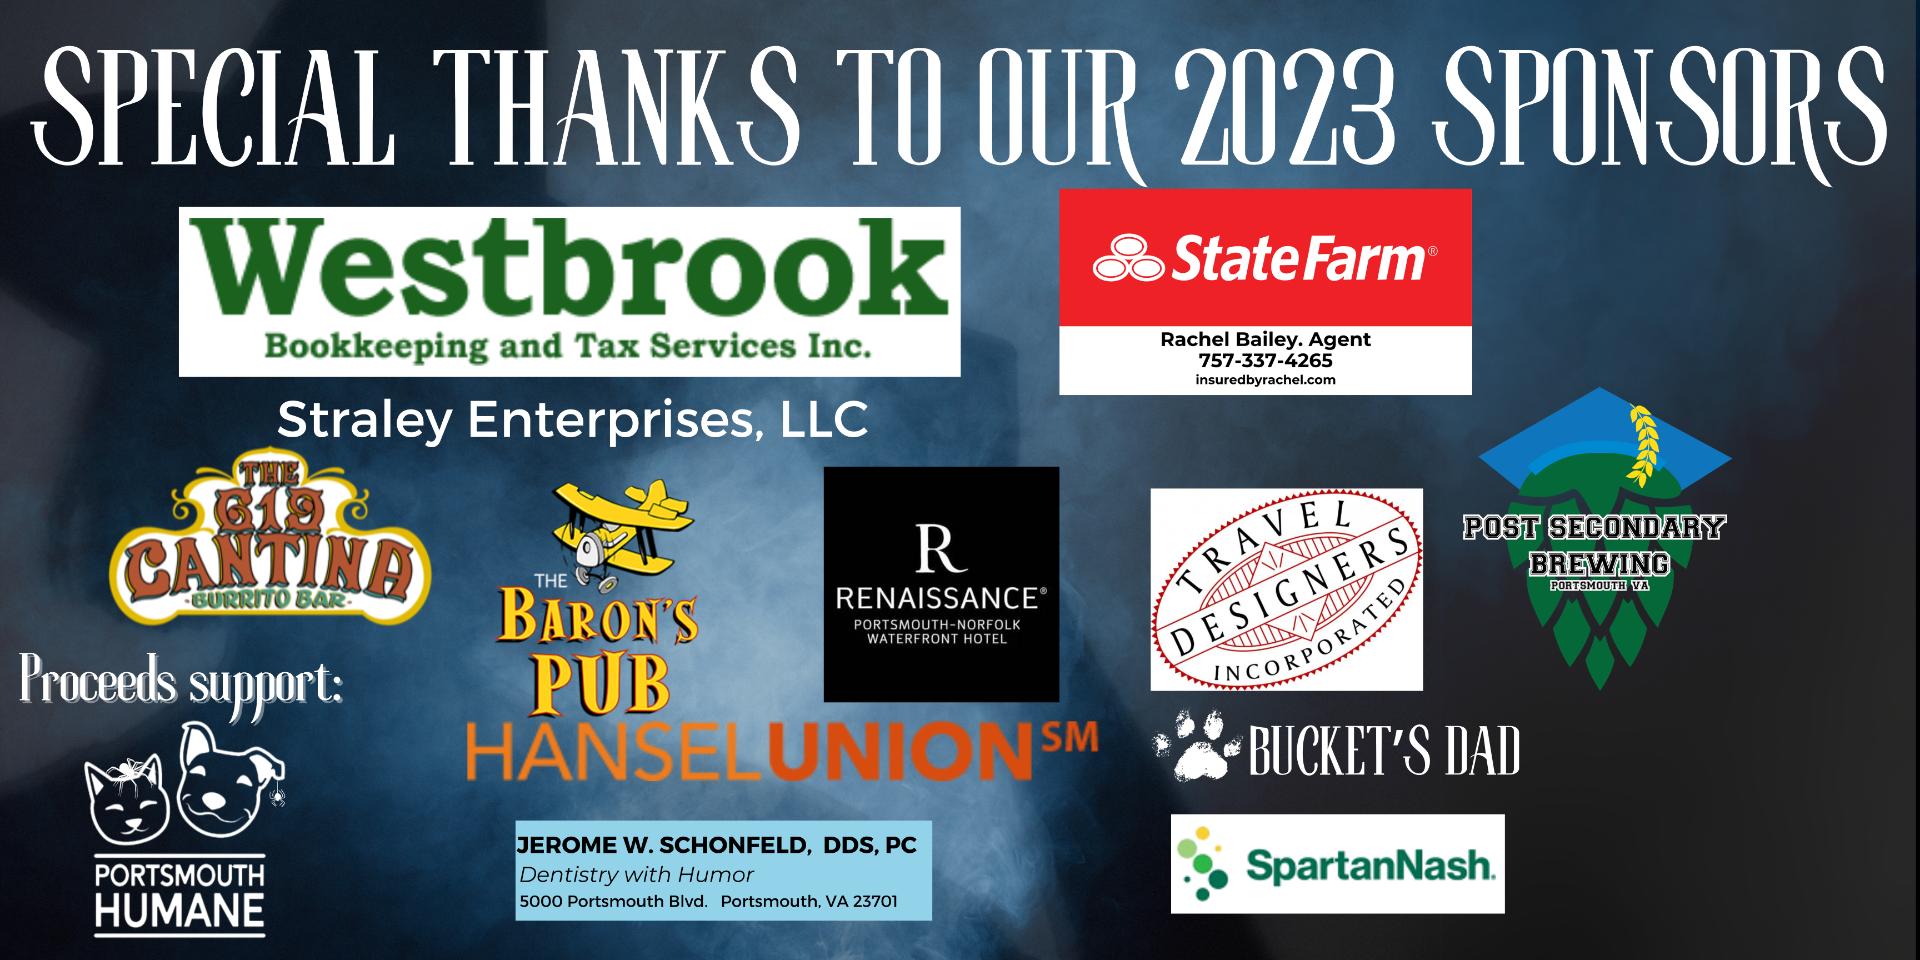 Special thanks to our 2021 sponsors.